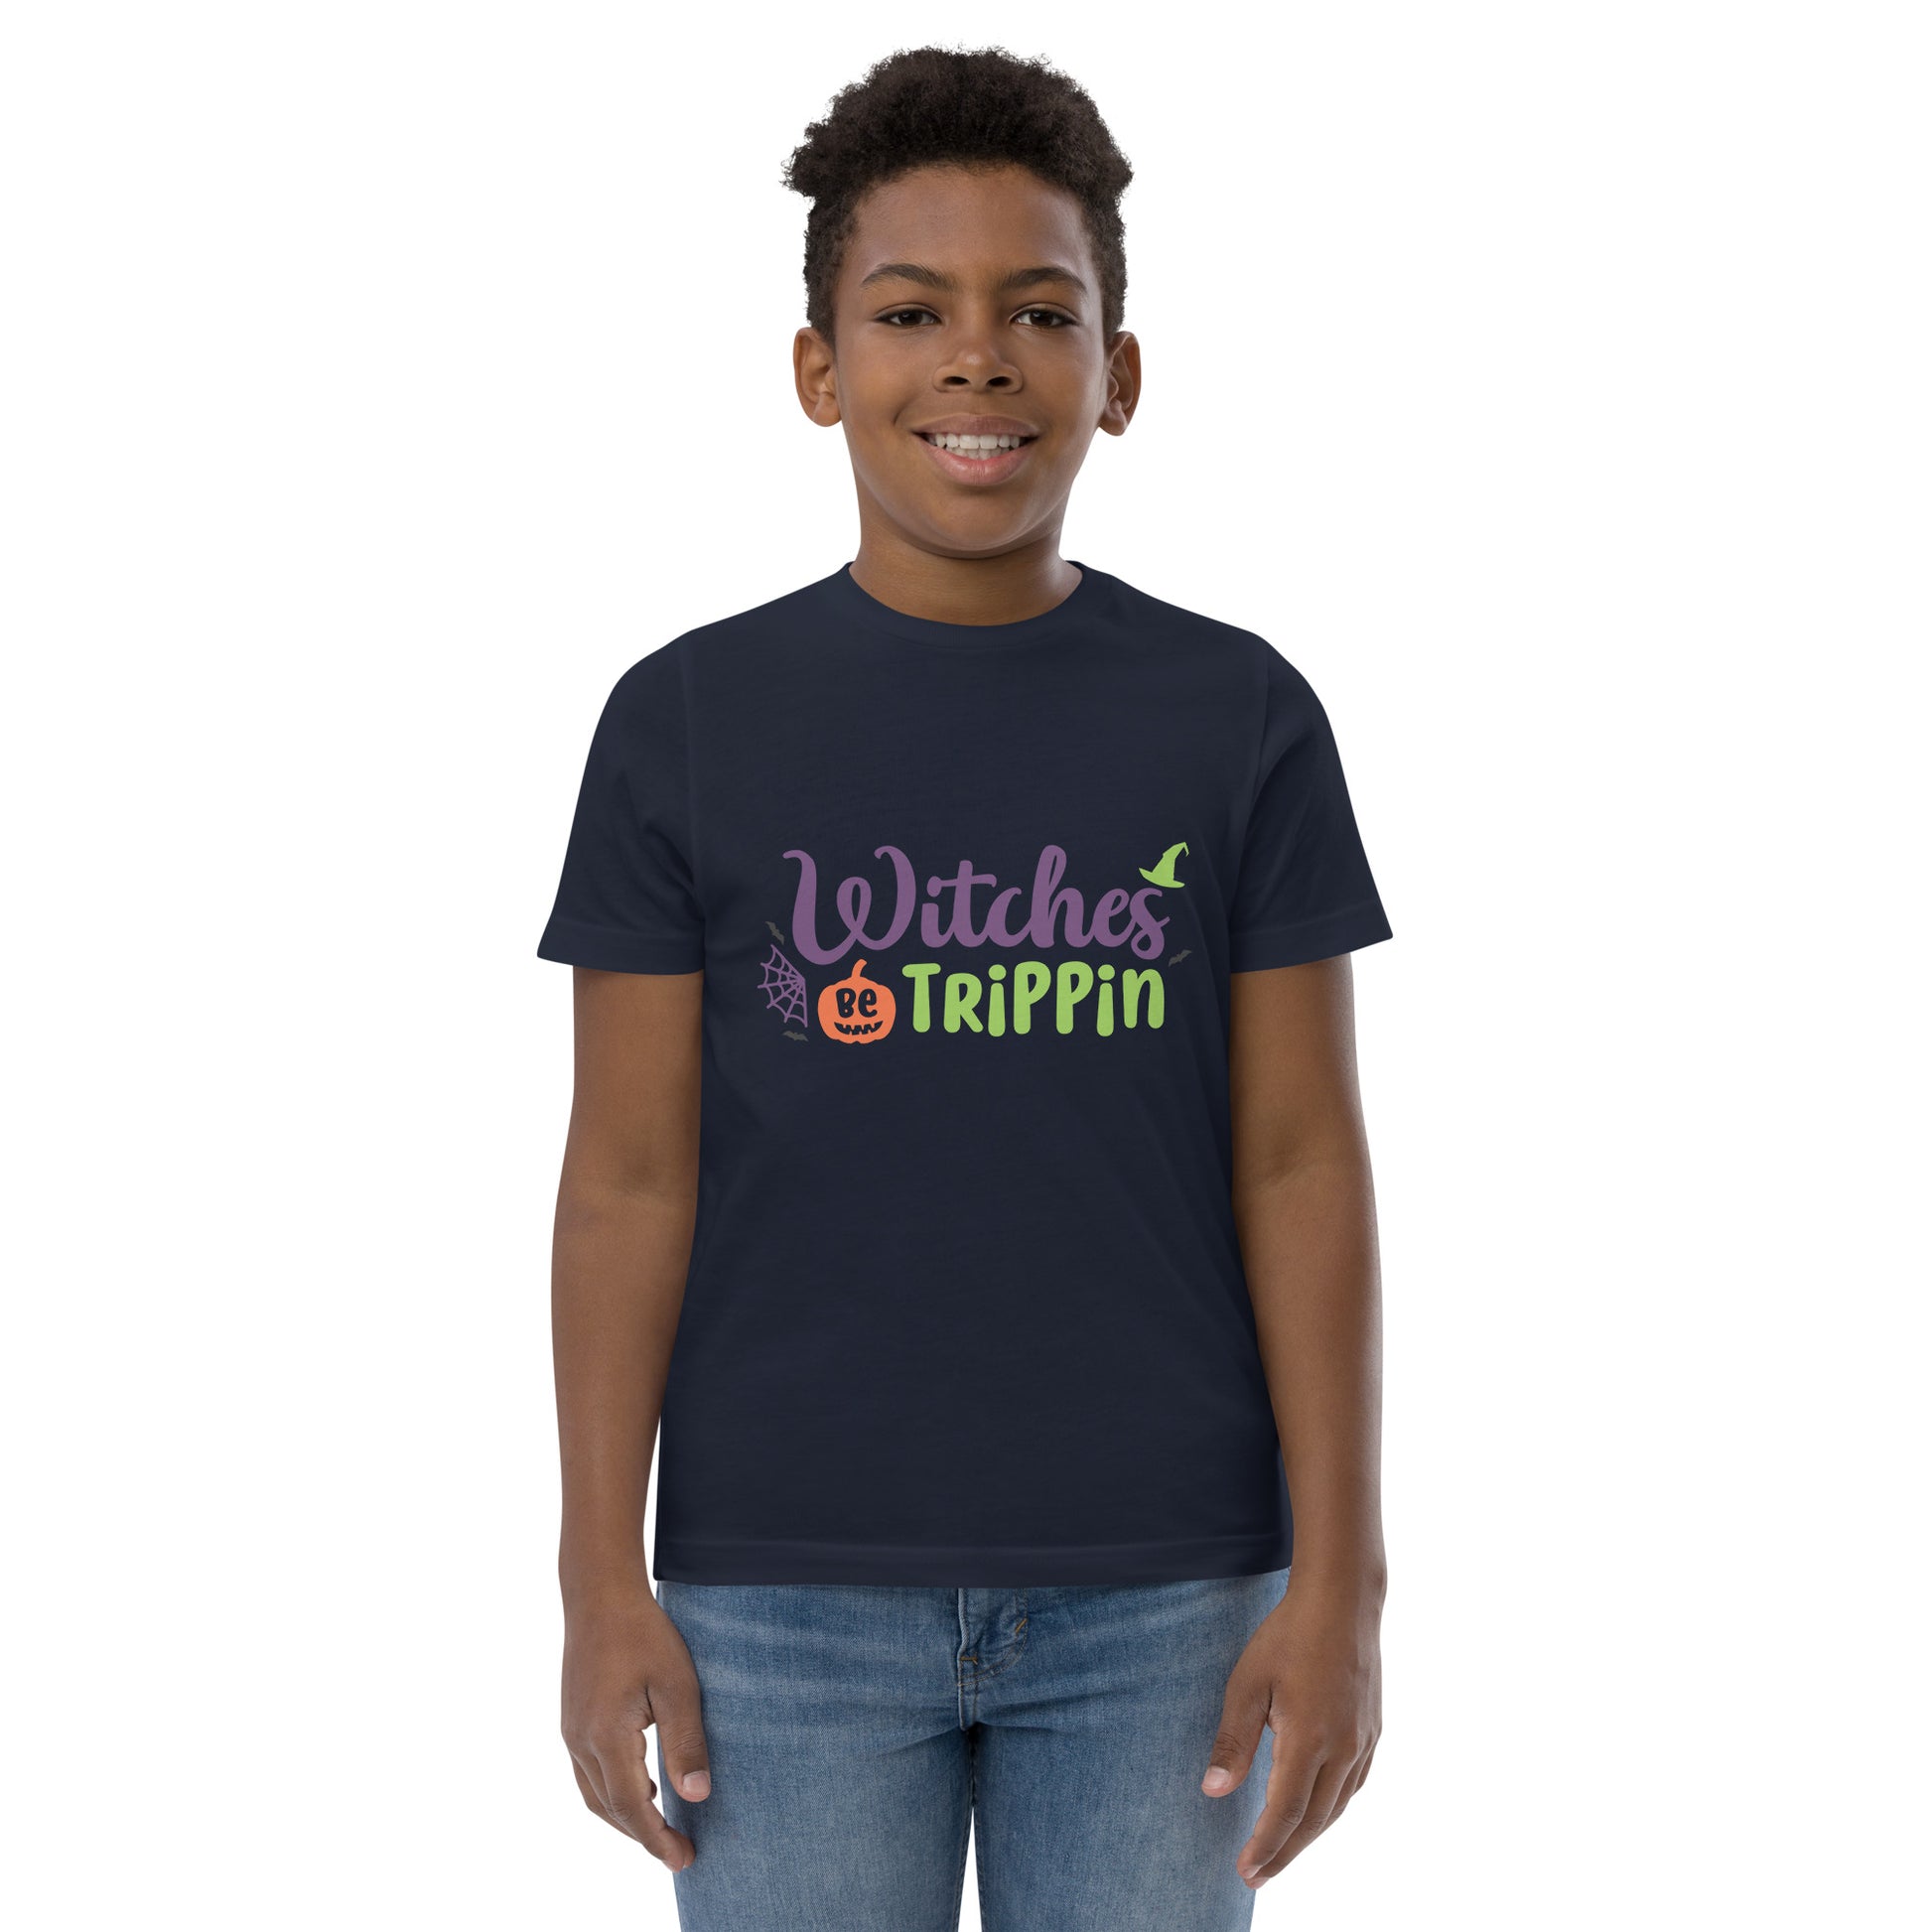 Witches Be Trippin' Youth jersey t-shirt